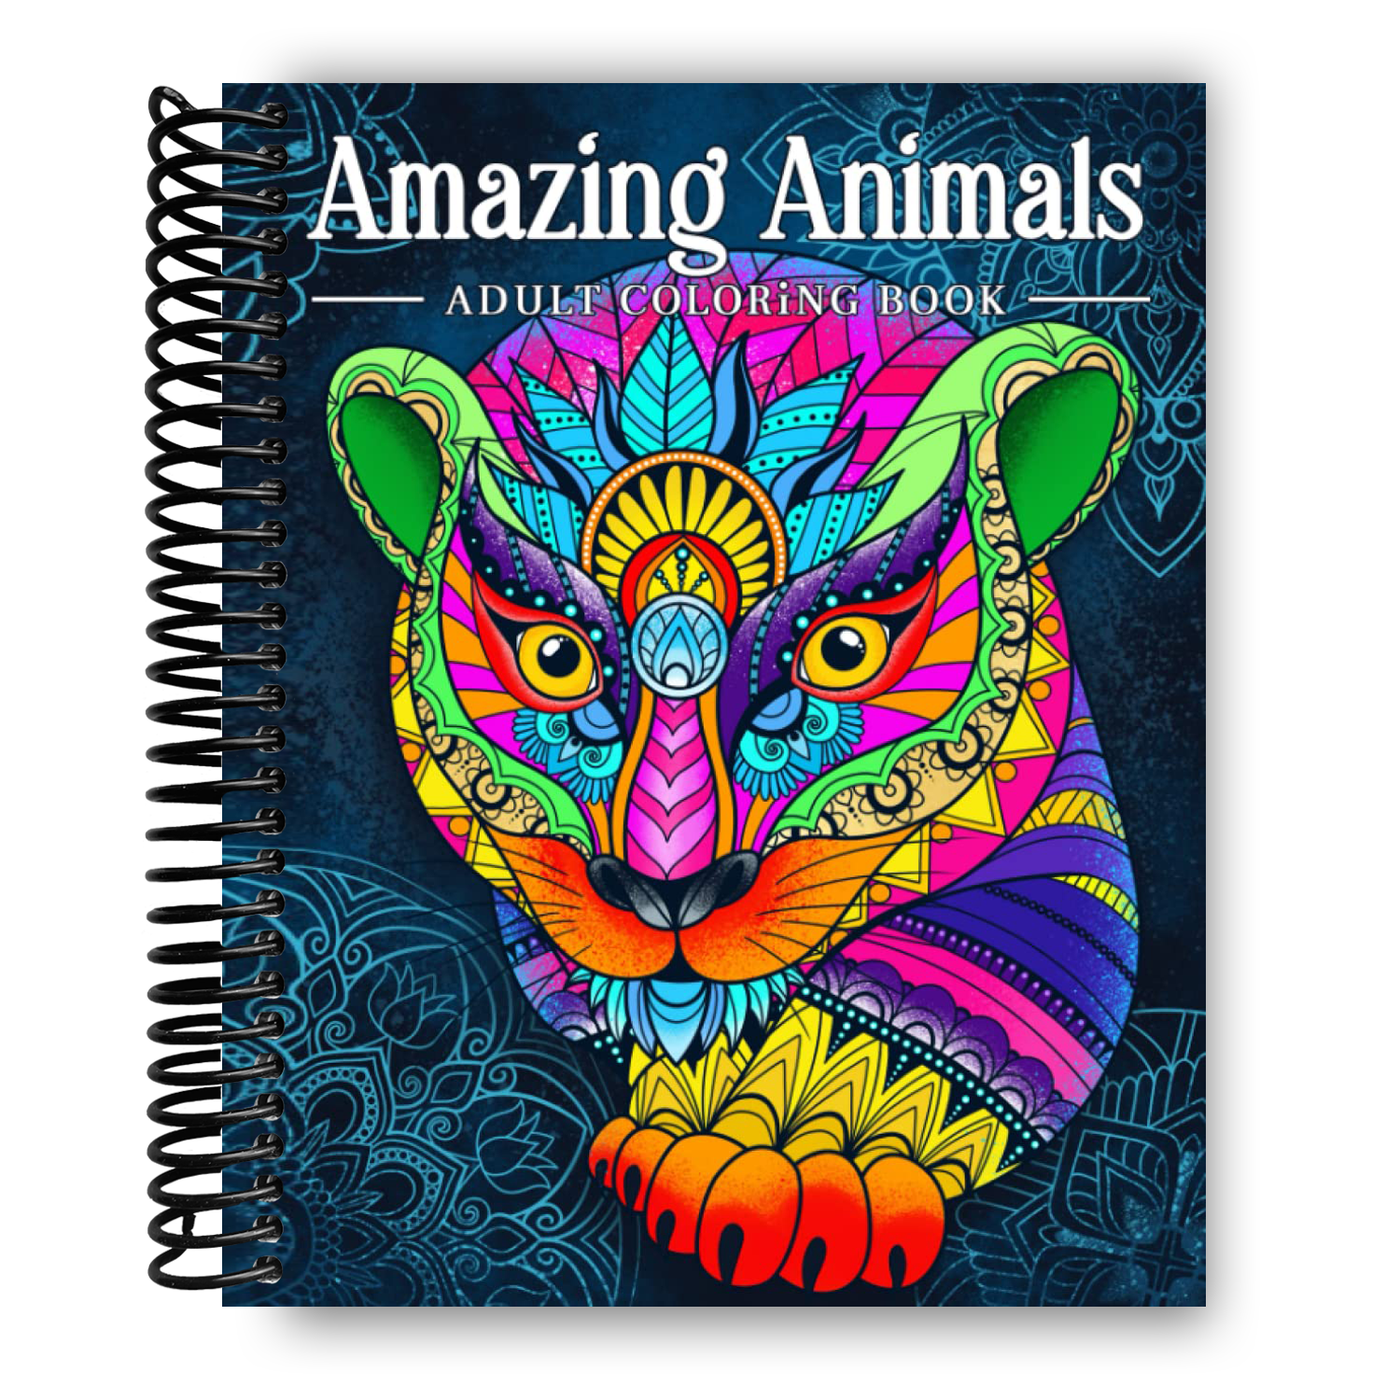 Amazing Animals: Adult Coloring Book, Stress Relieving Mandala Animal Designs (Spiral Bound)